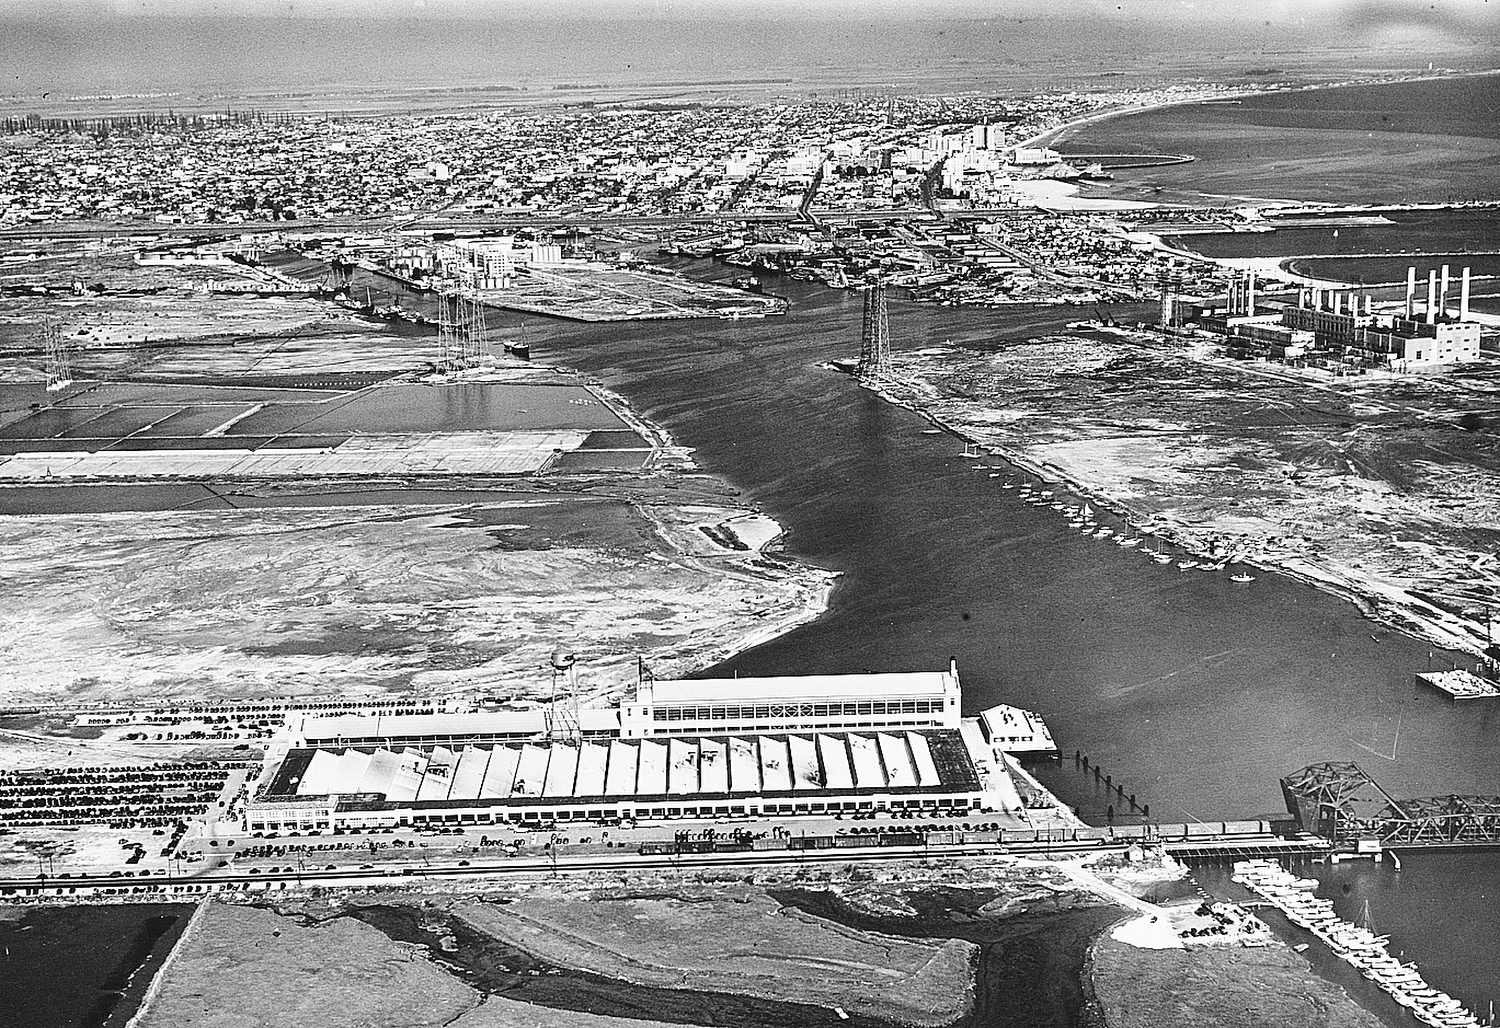 The Ford plant, foreground, opened in 1930, turning out vehicles until 1957. It was torn down in 1990.